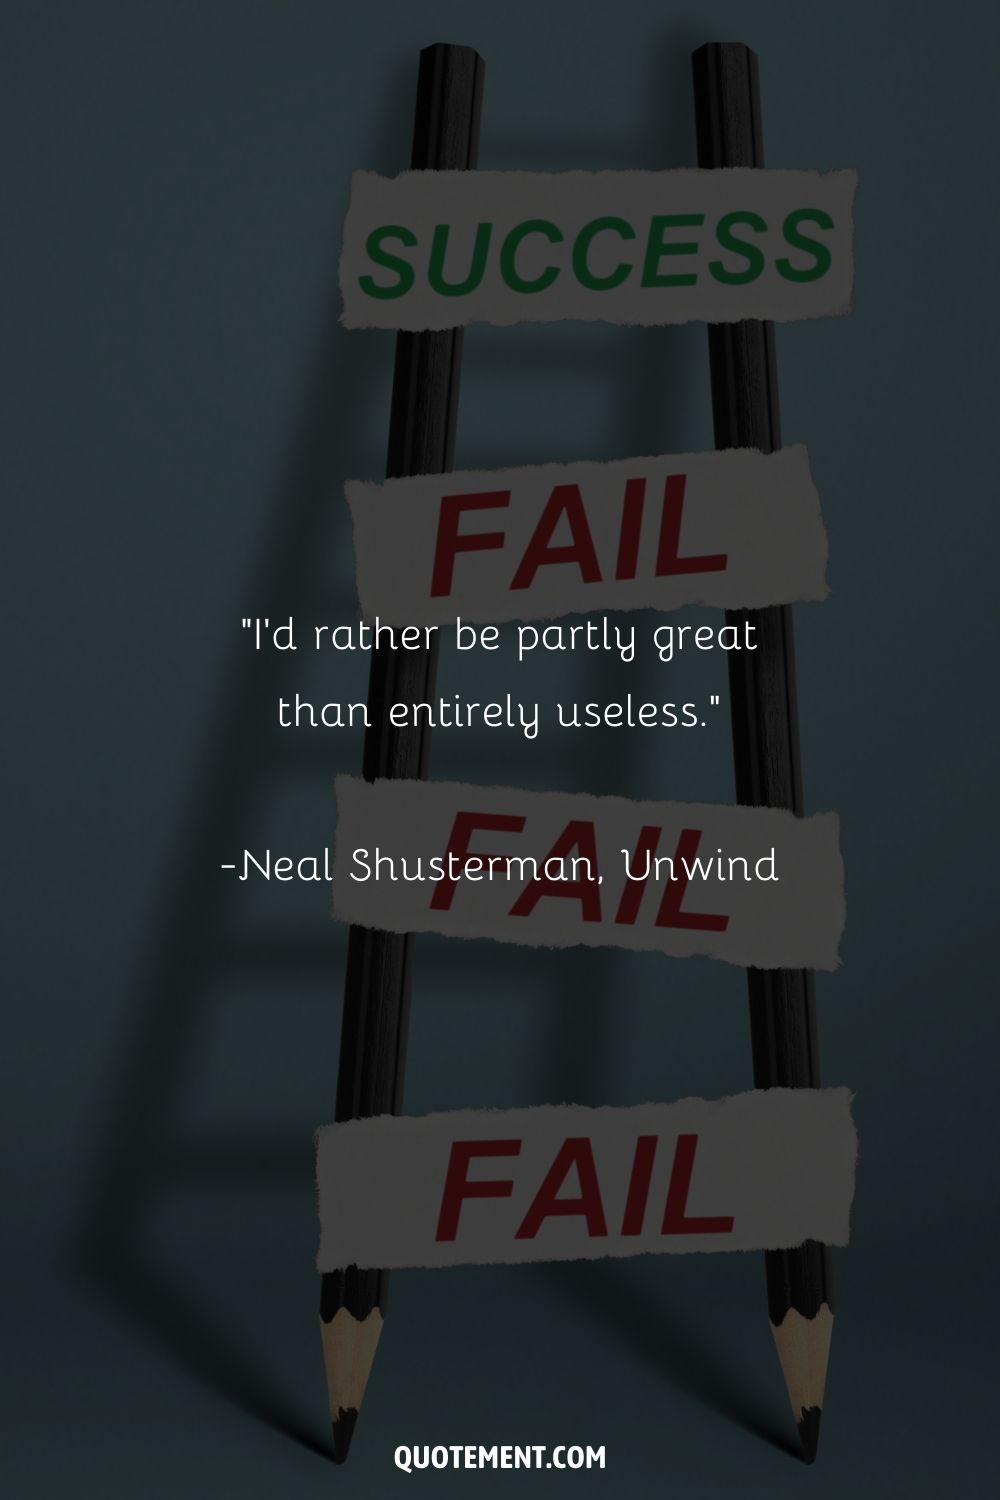 “I'd rather be partly great than entirely useless.” ― Neal Shusterman, Unwind